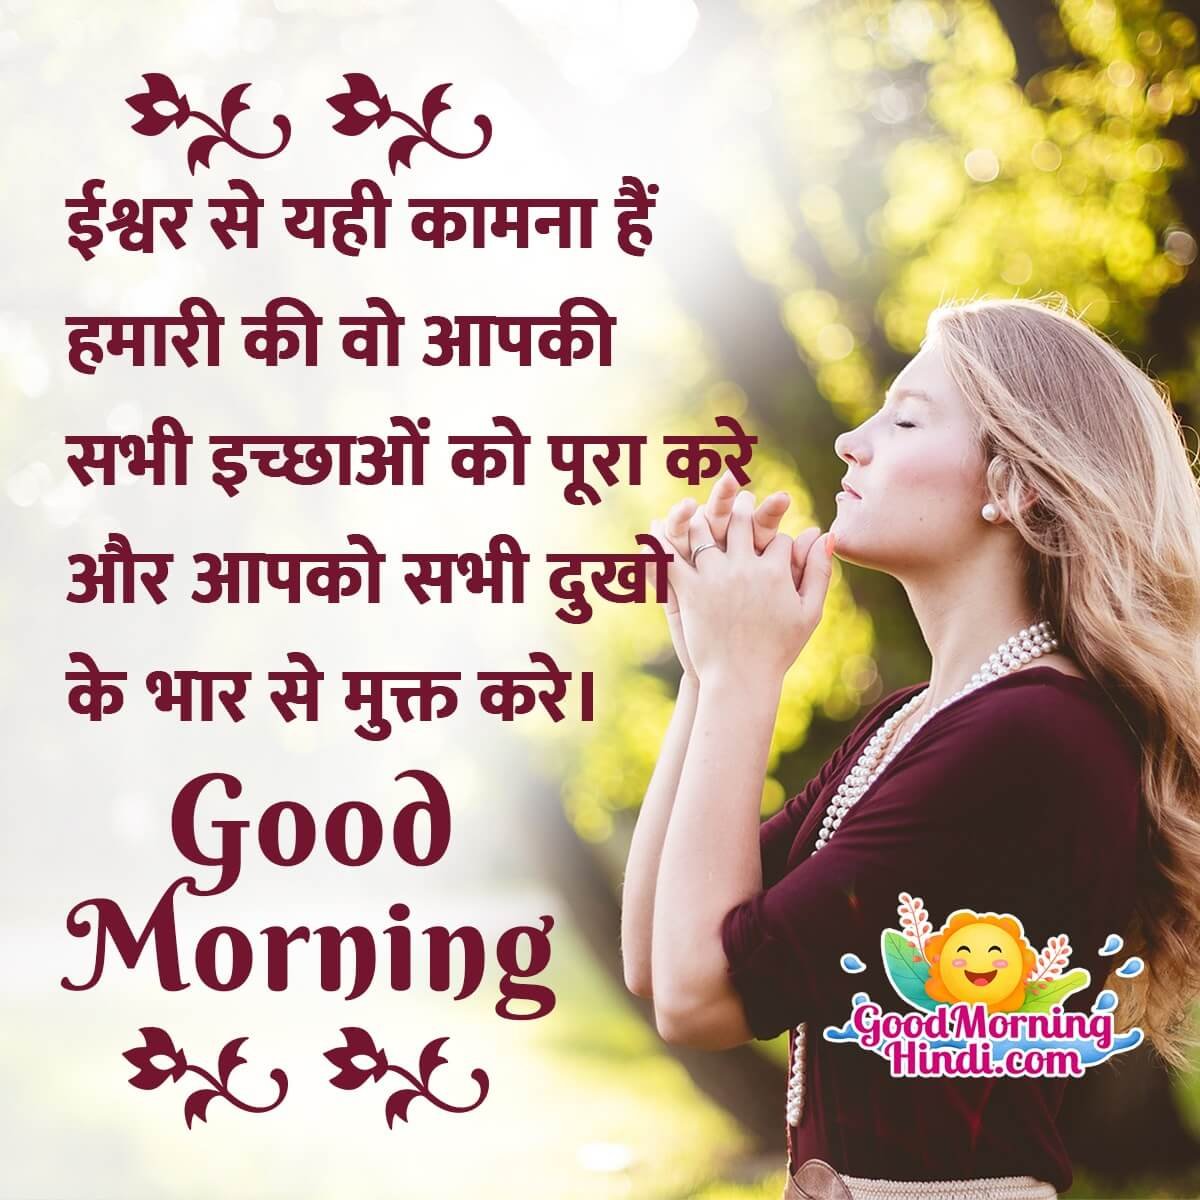 Good Morning Wishes Images in Hindi - Good Morning Wishes & Images In Hindi